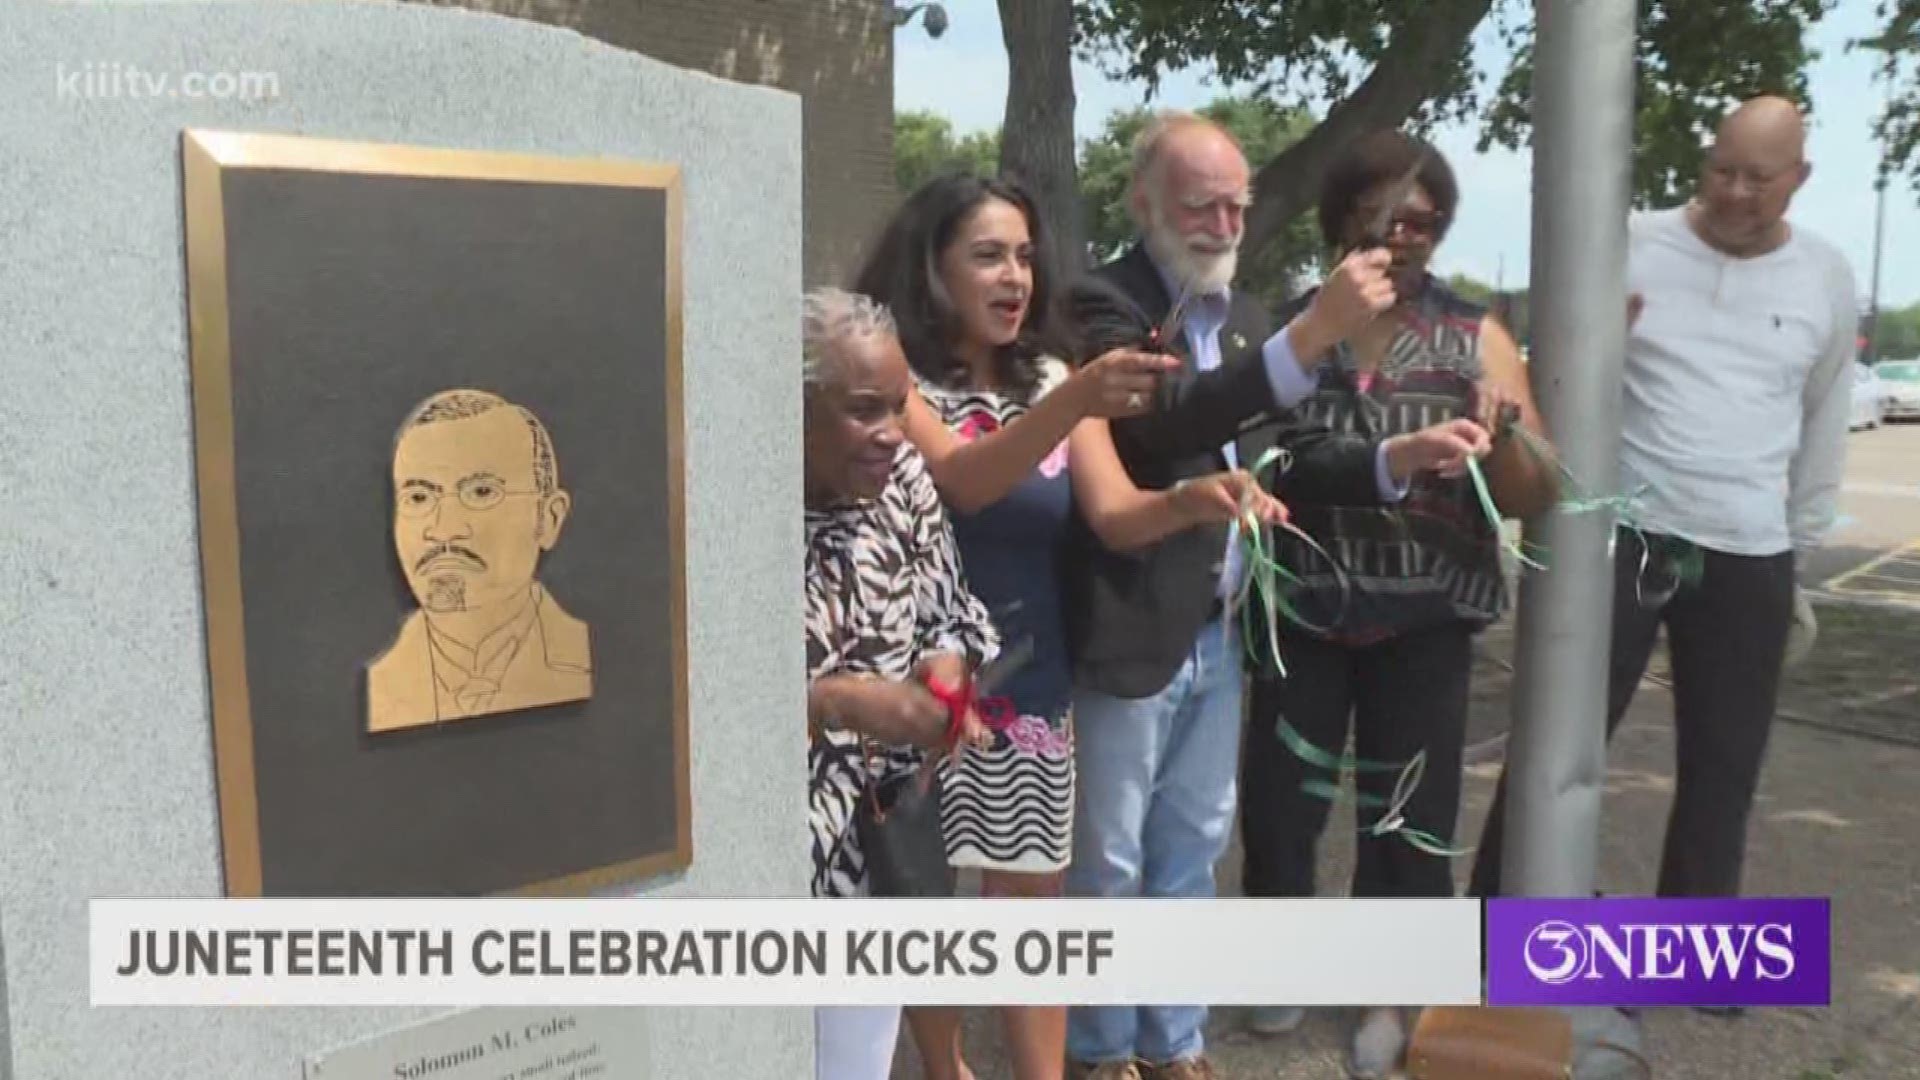 There will be many Juneteenth activities for people to get involved with throughout the week.